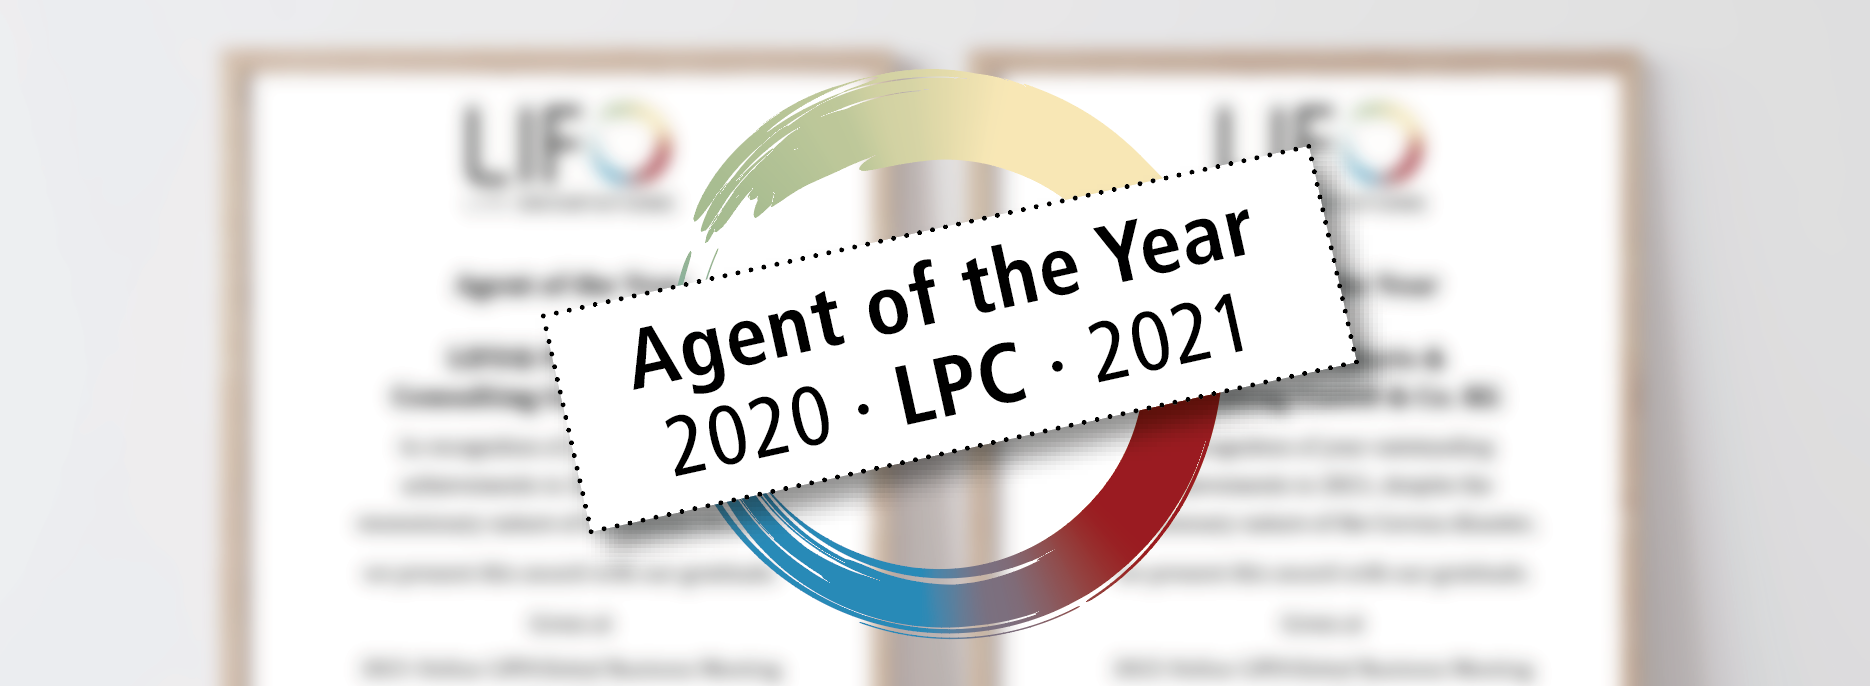 Agent of the Year - 2020 - LPC - 2021